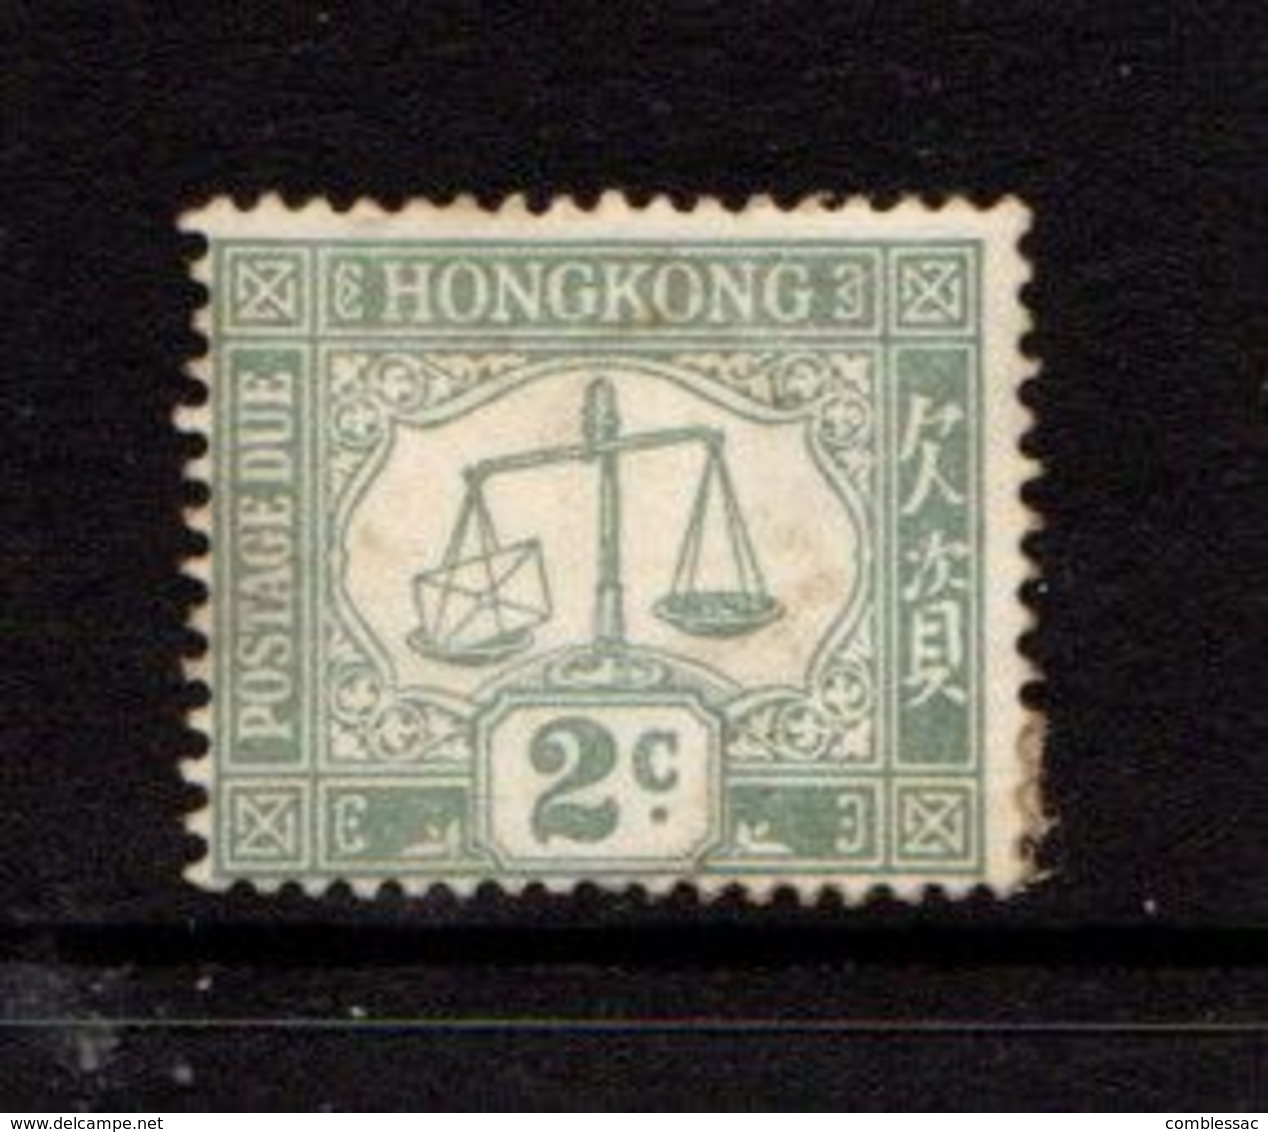 HONG  KONG    1923    Postage  Due    2c  Green  (heavy Hinge Hence Price)    MH - Postage Due